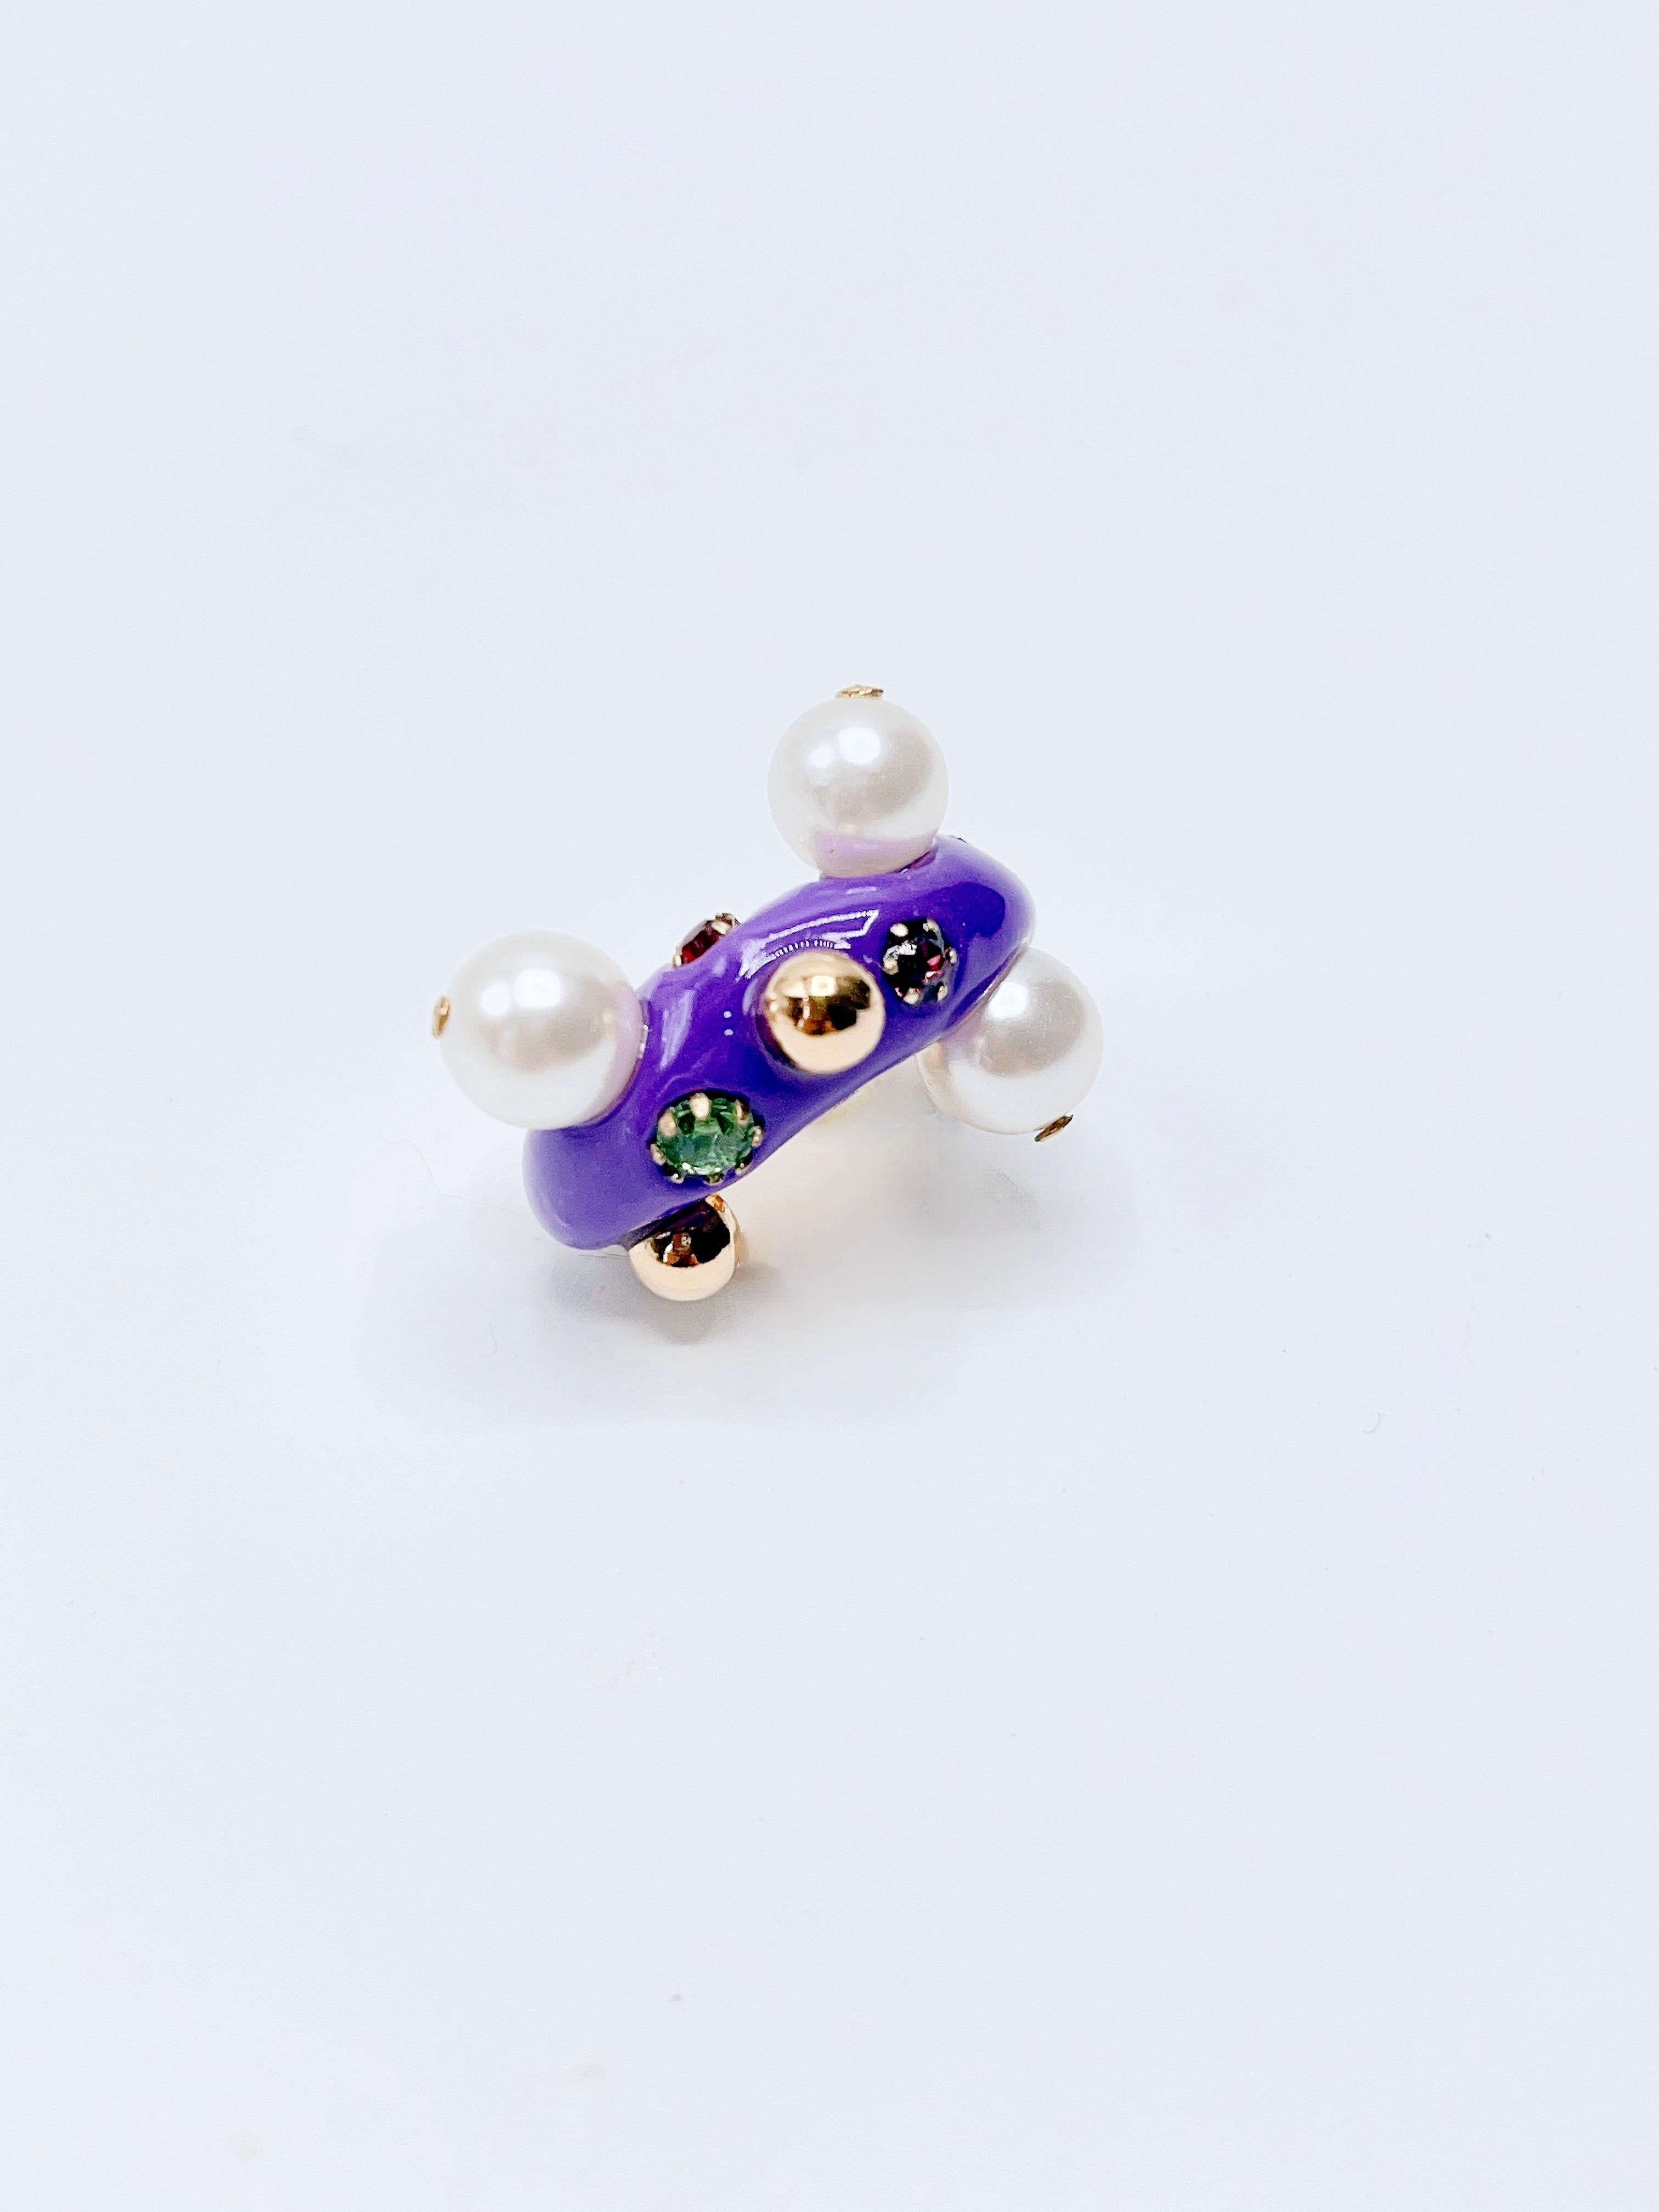 Ball Cut TEARDROPS in a Diary, No. 2_in Purple_Hand crafted ear cuff For Sale